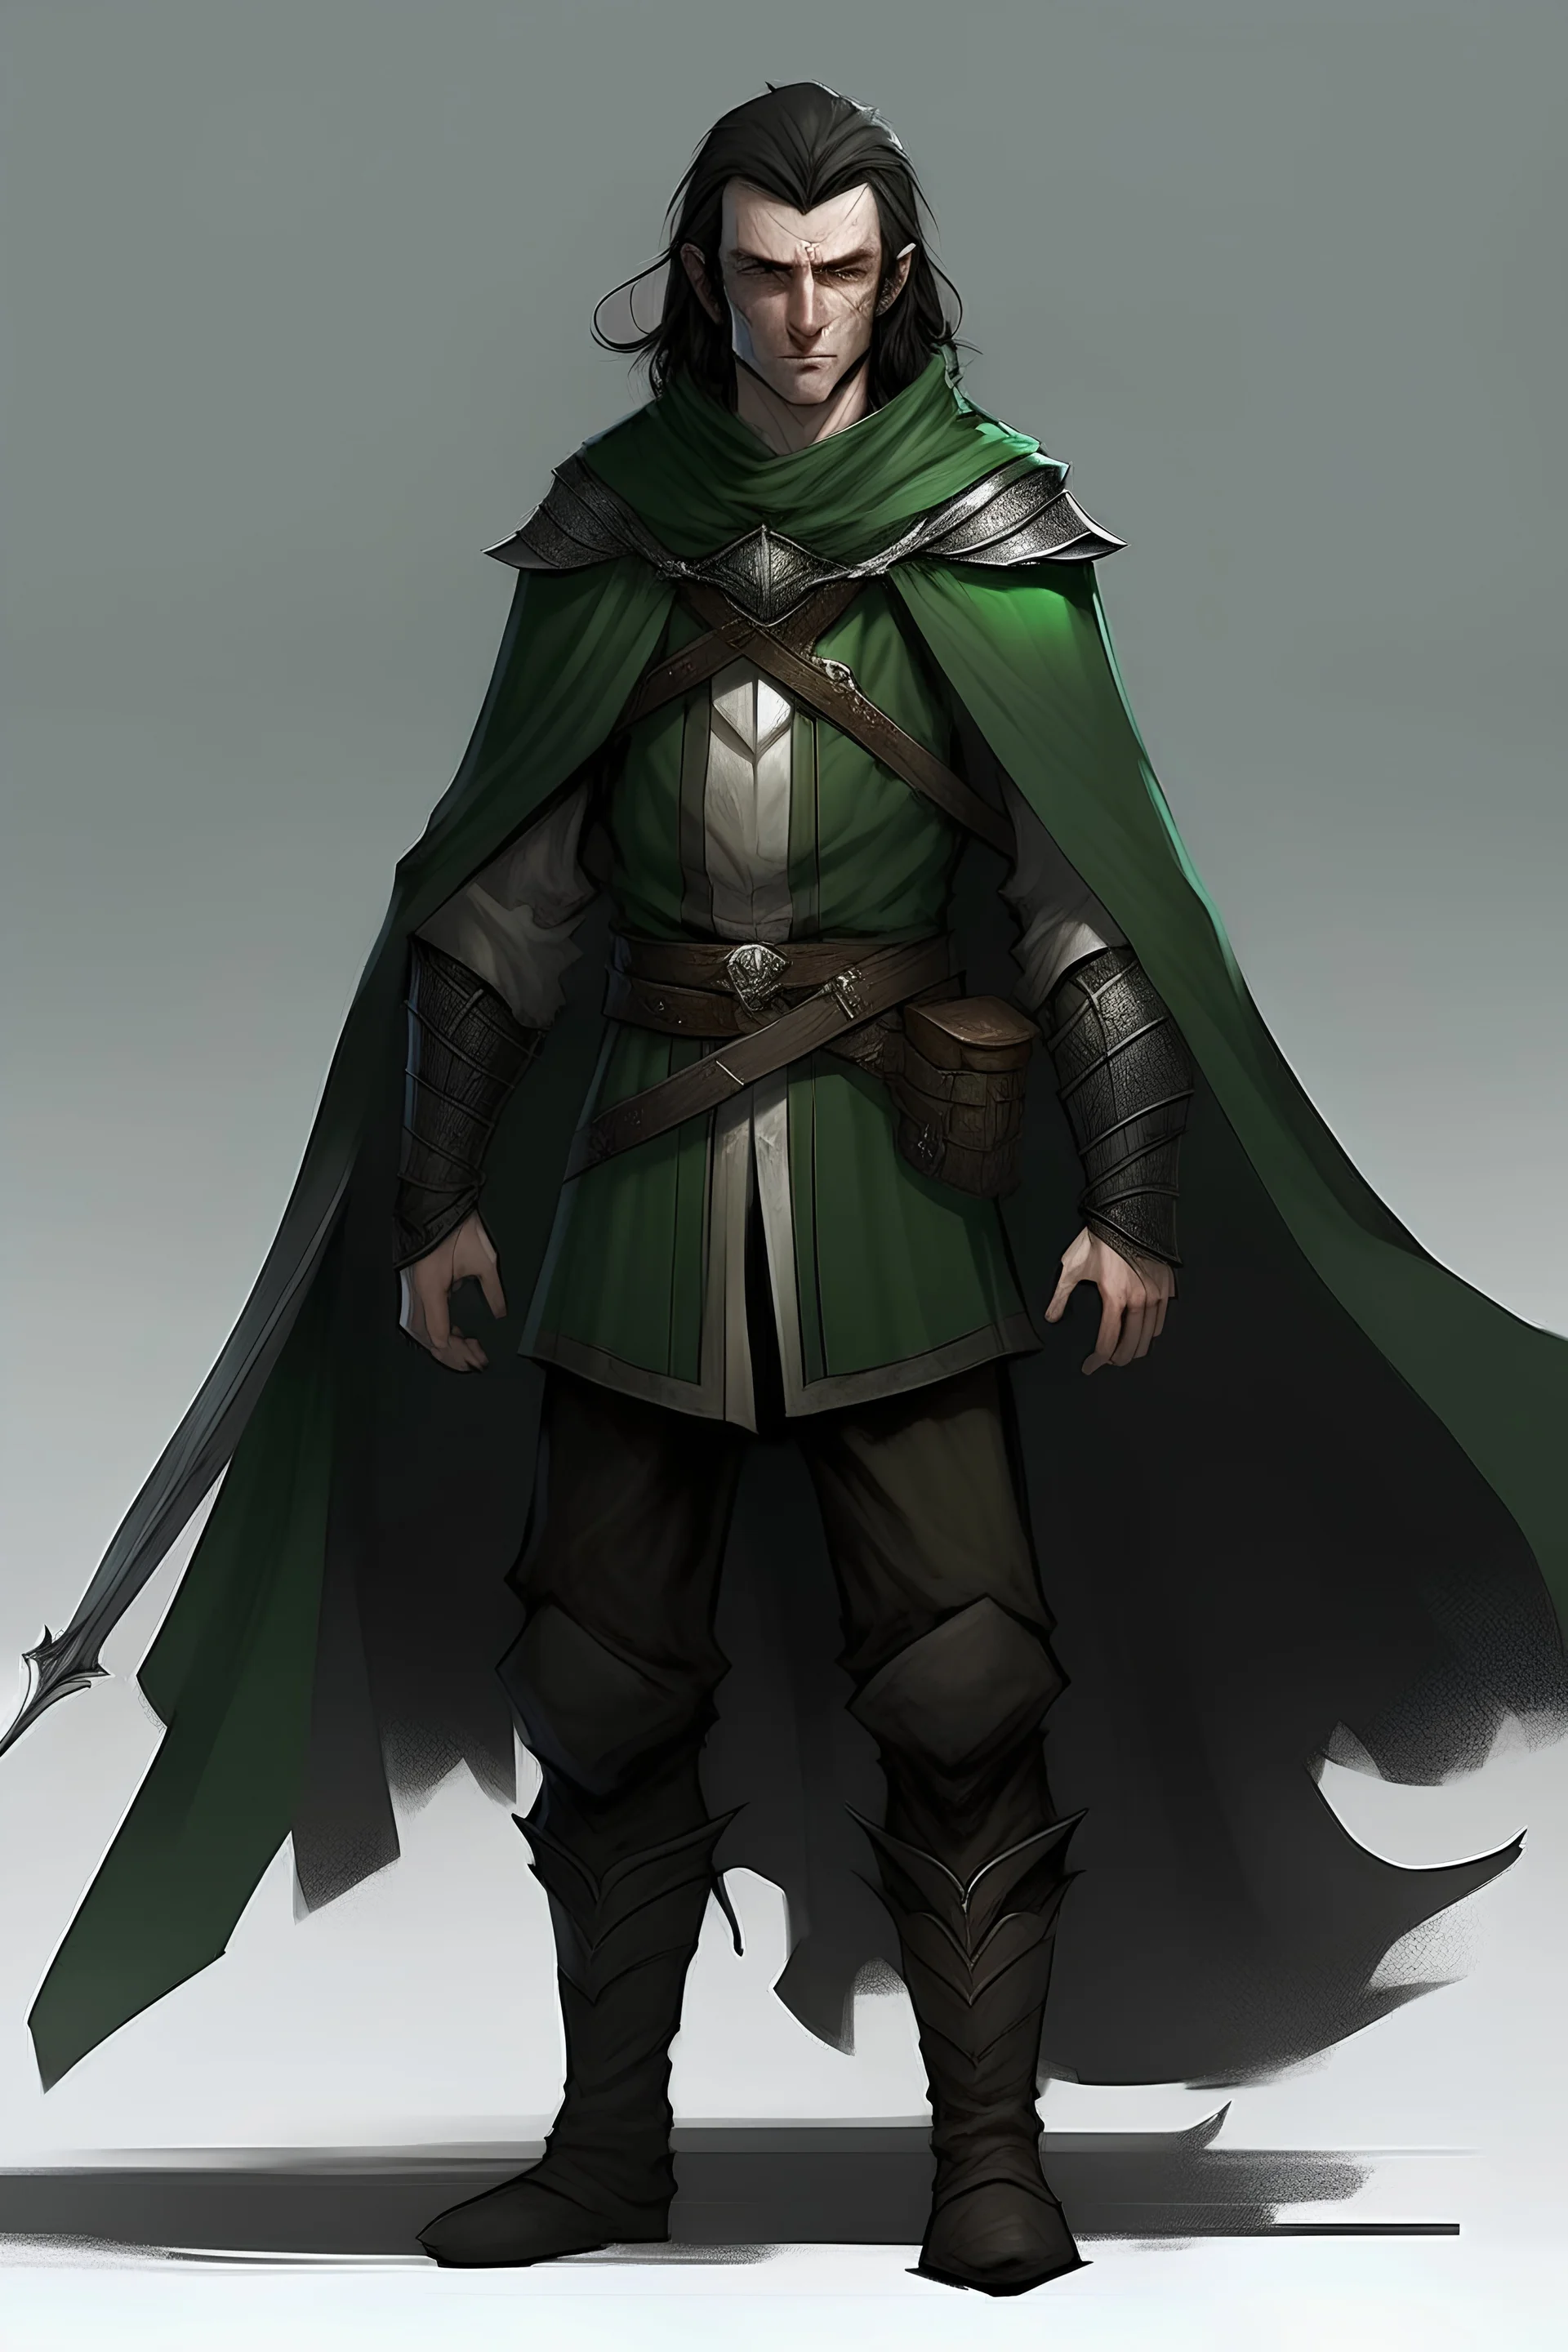 male wood elf. scale mail. Hooded. Copper skin. Long black hair. Green eyes. Slender. Black boots. Bow.